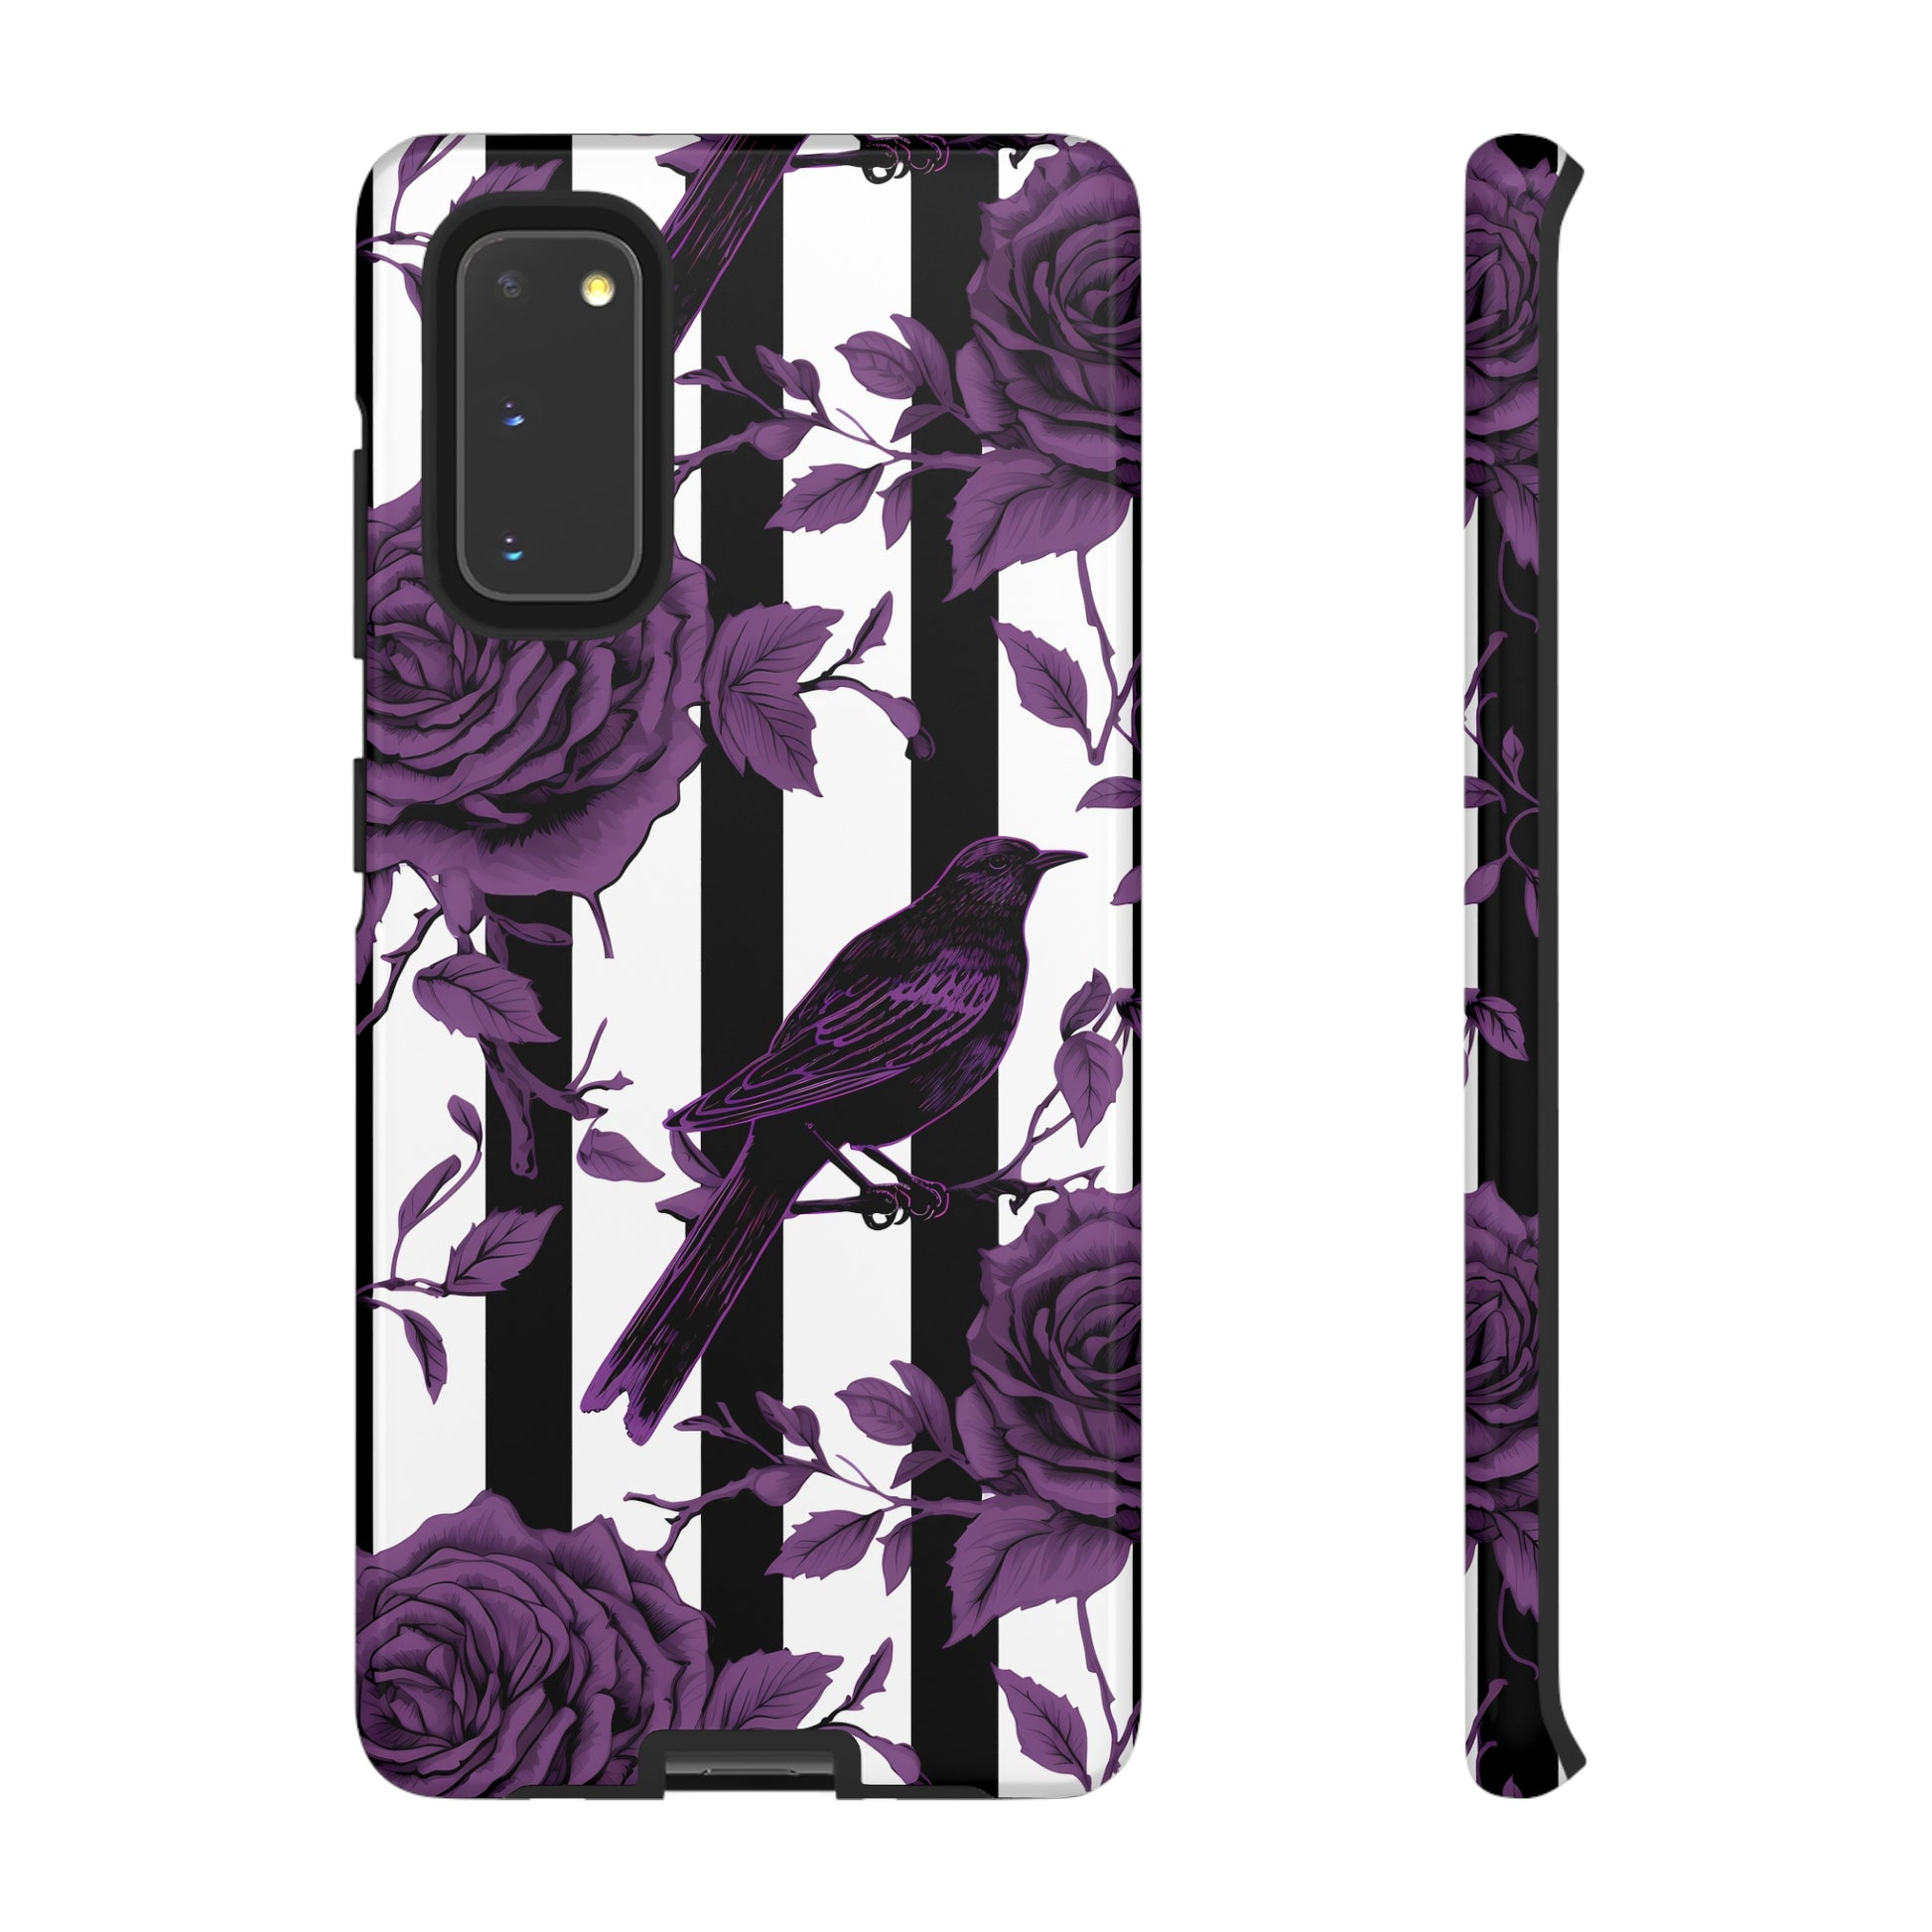 Striped Crows and Roses Tough Cases for iPhone Samsung Google PhonesPhone CaseVTZdesignsSamsung Galaxy S20GlossyAccessoriescrowsGlossy